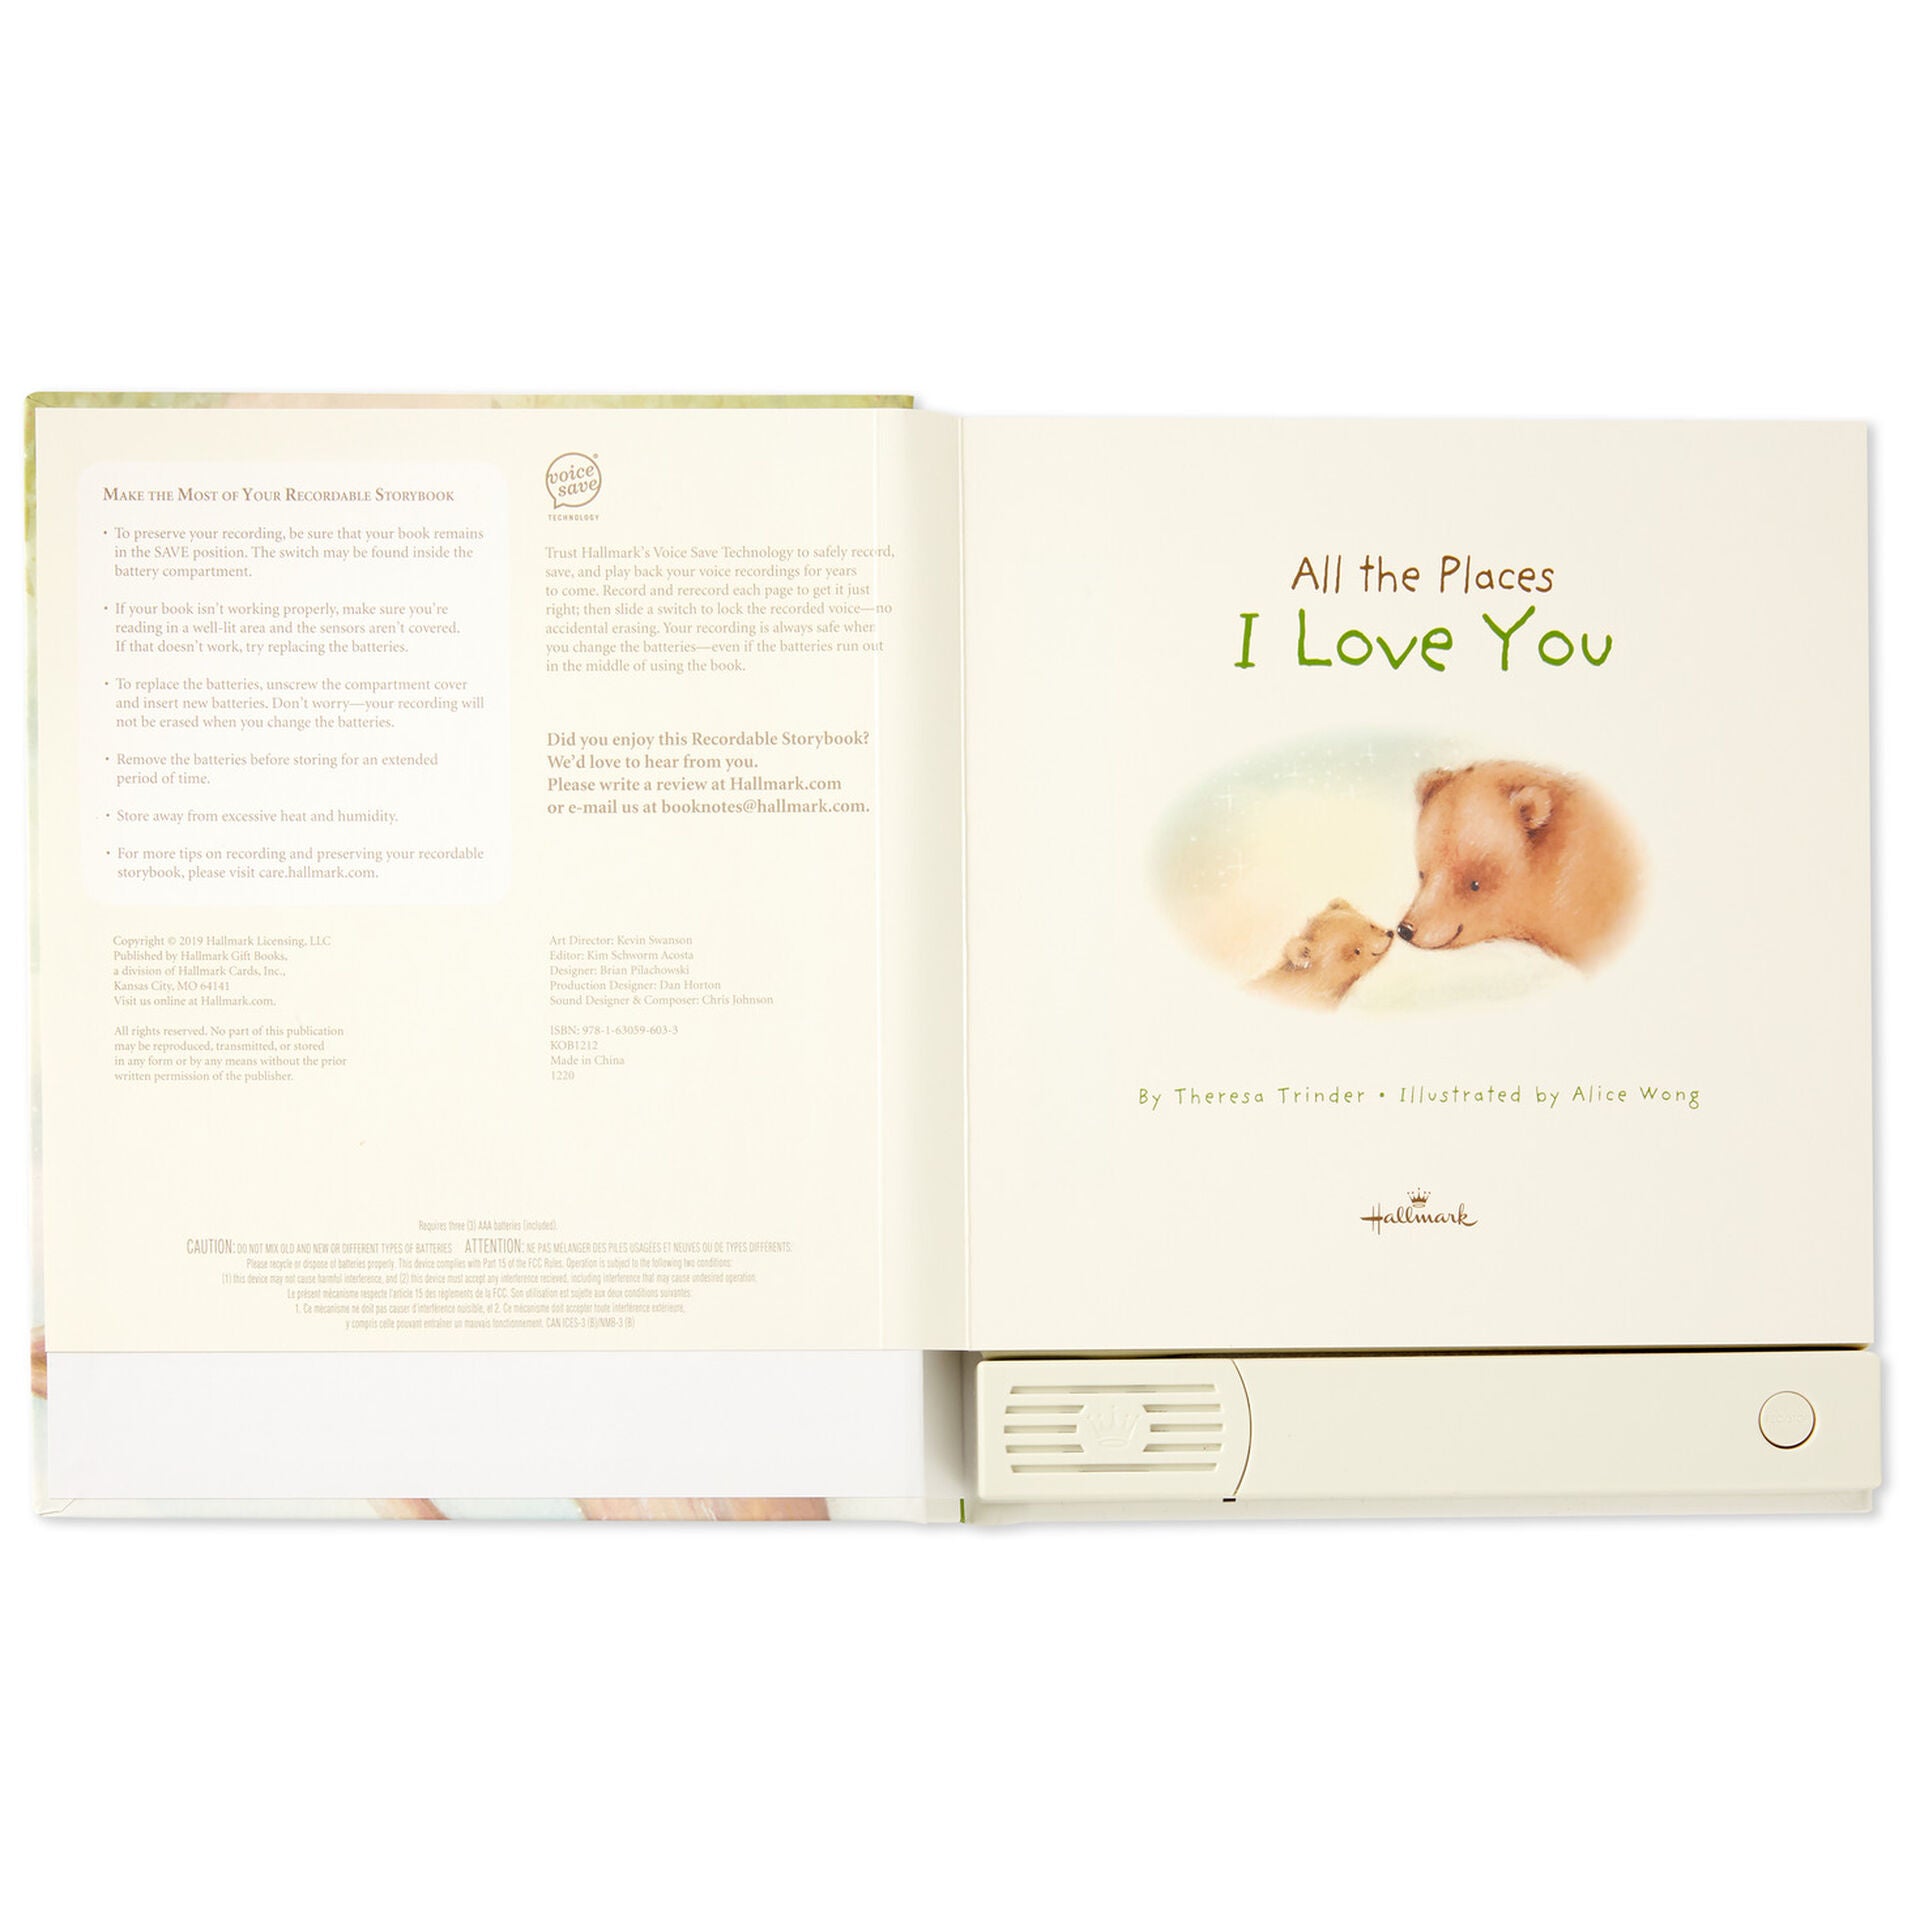 All the Places I Love You Recordable Storybook